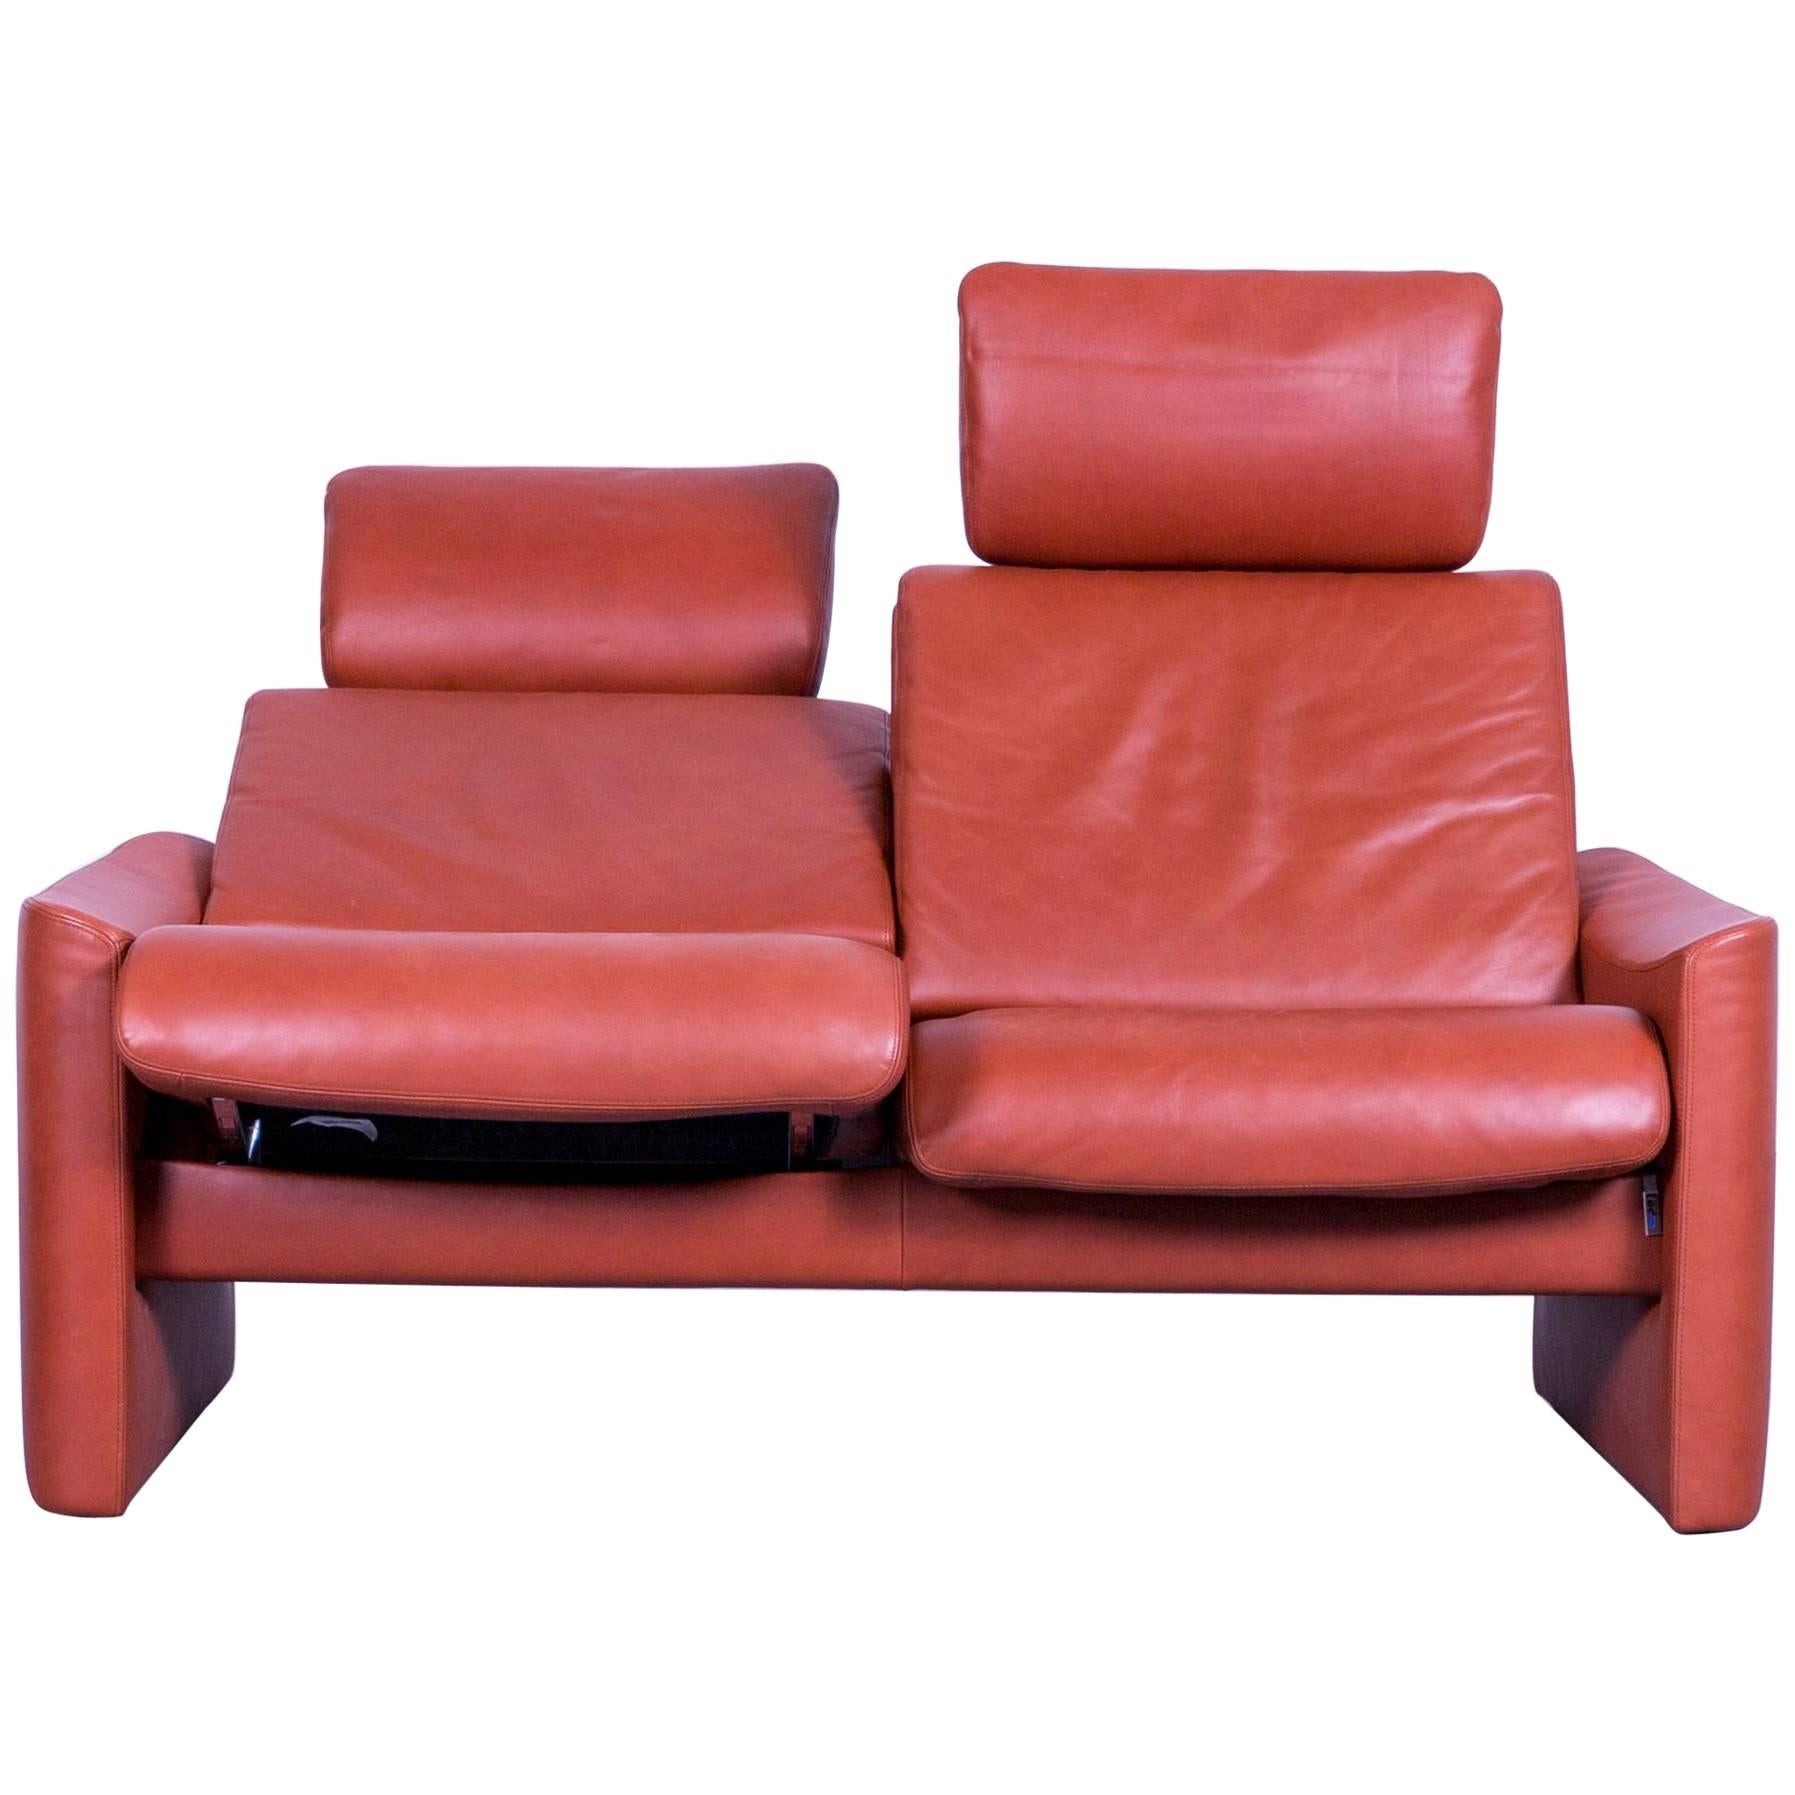 Erpo Designer Sofa Leather Brown Two-Seat Couch Modern Recliner